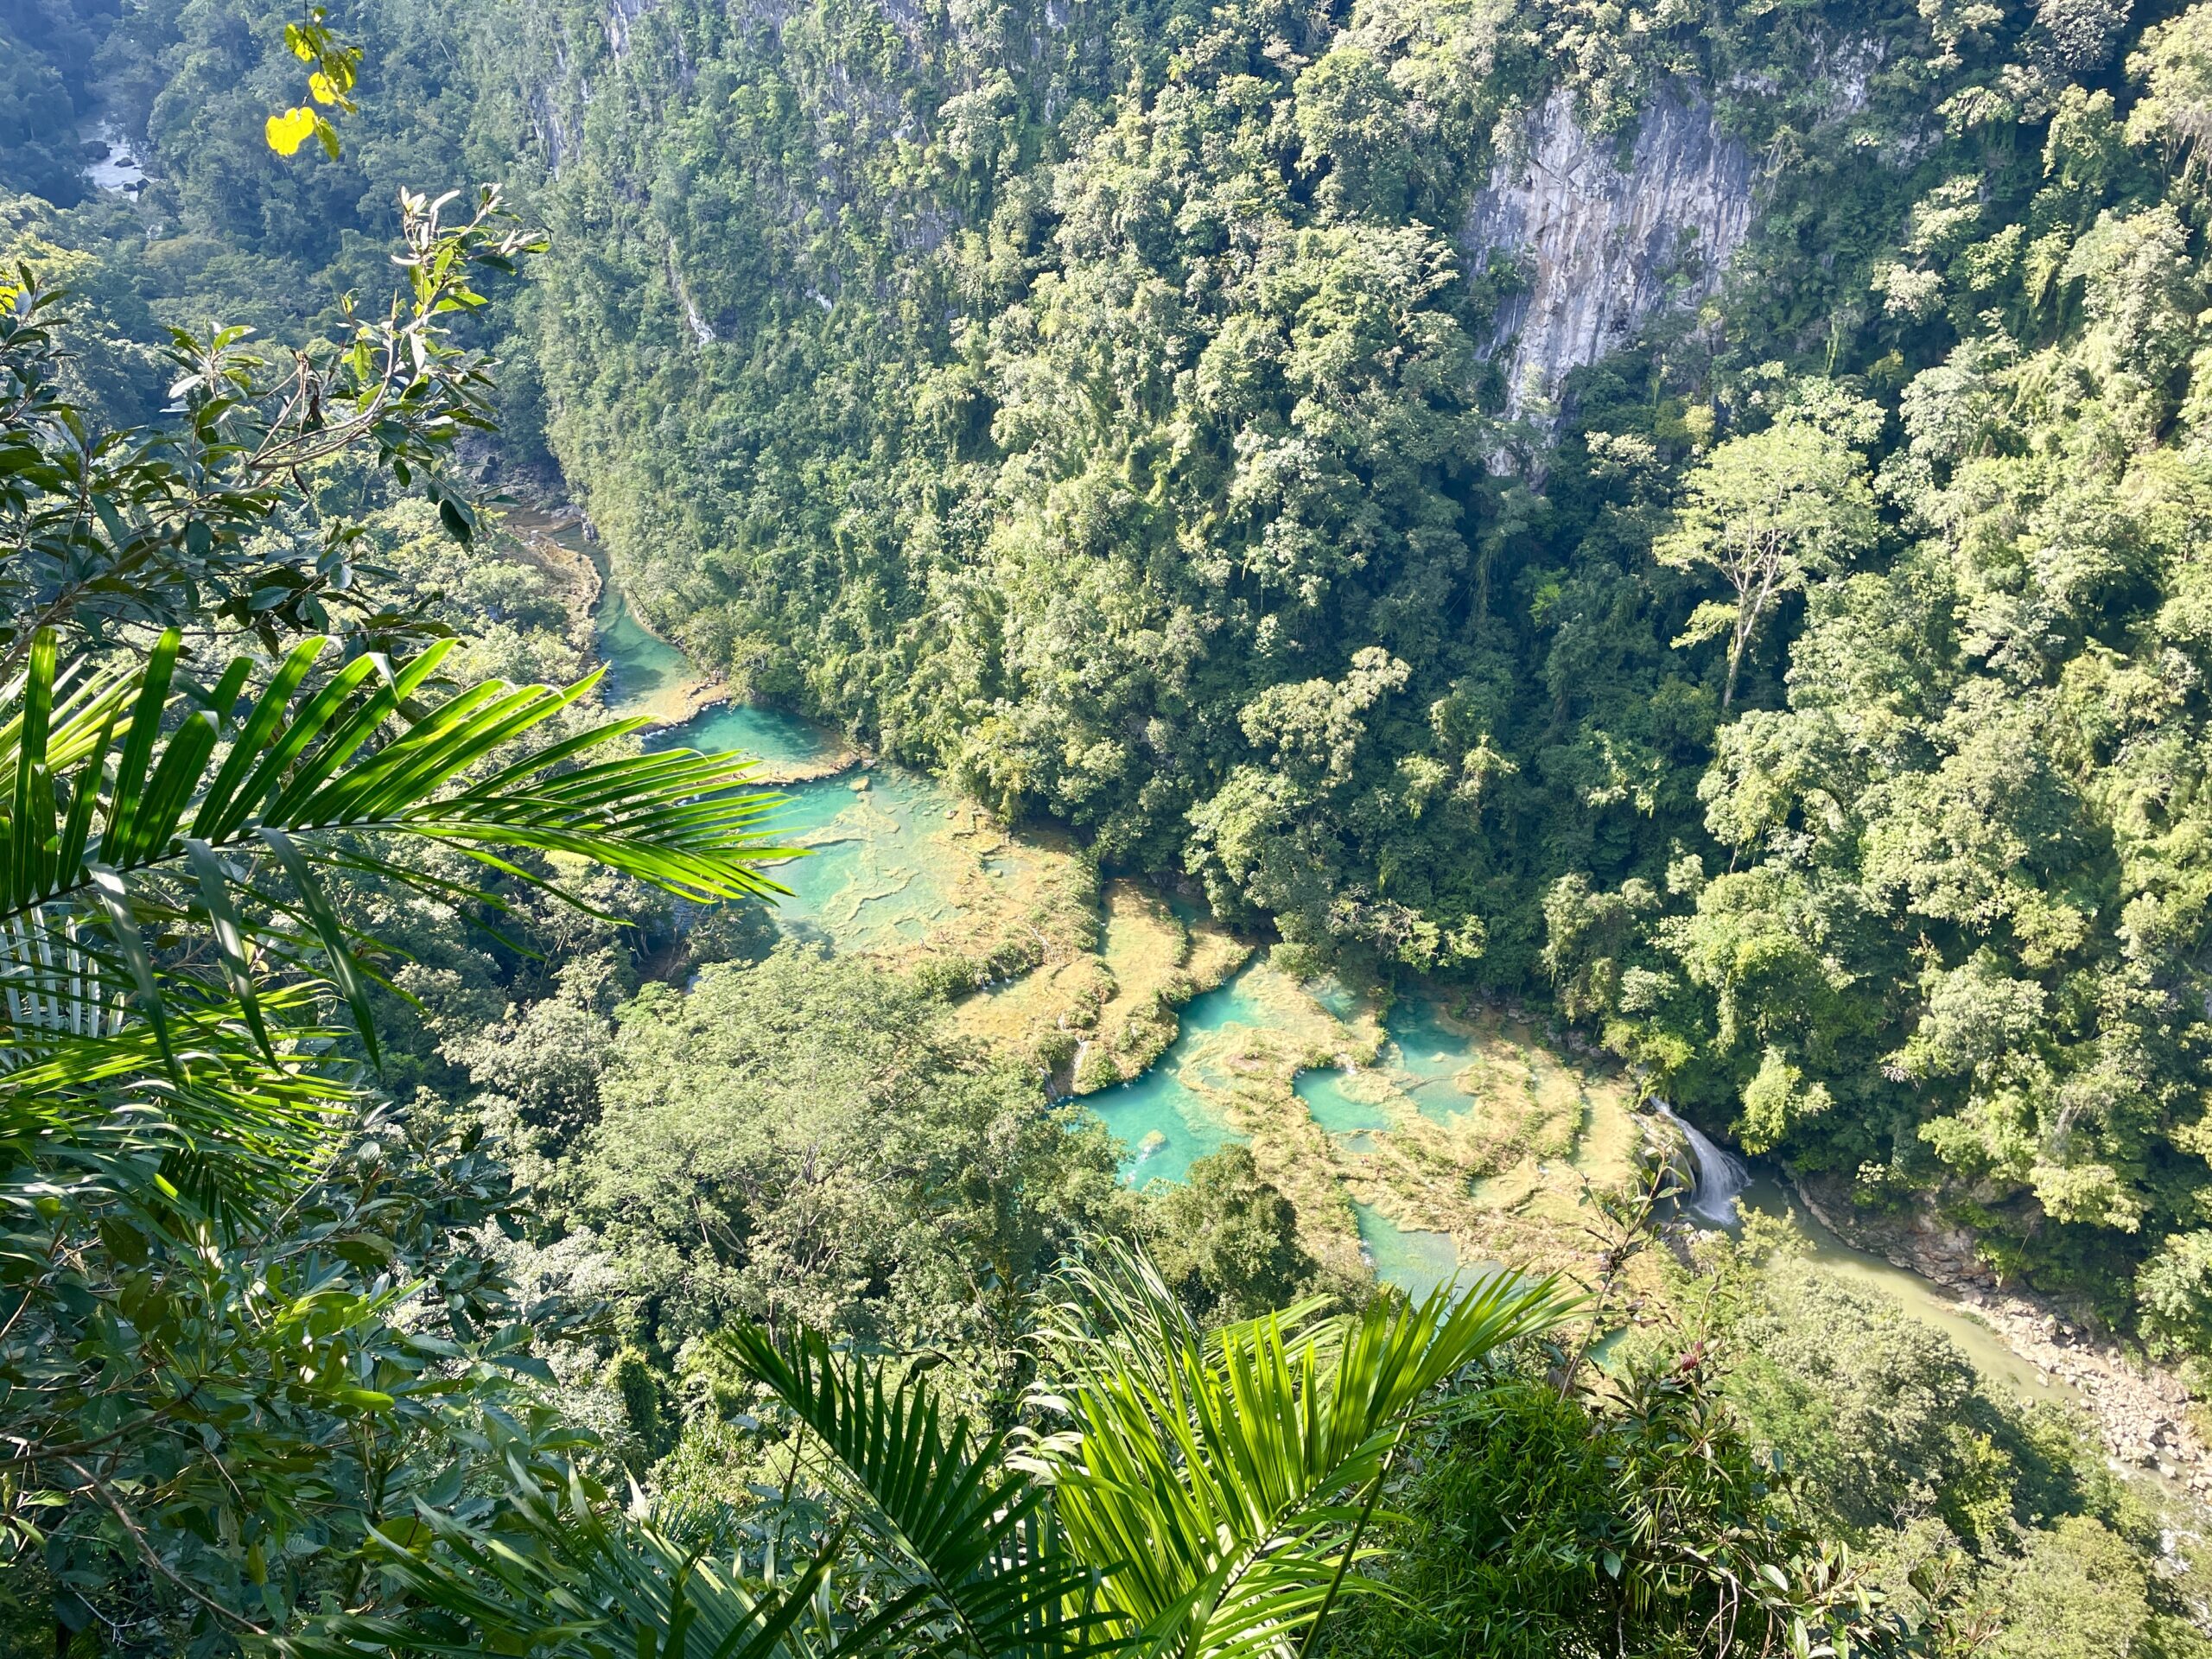 Complete Guide to Semuc Champey: Everything You Need To Know Before You Go